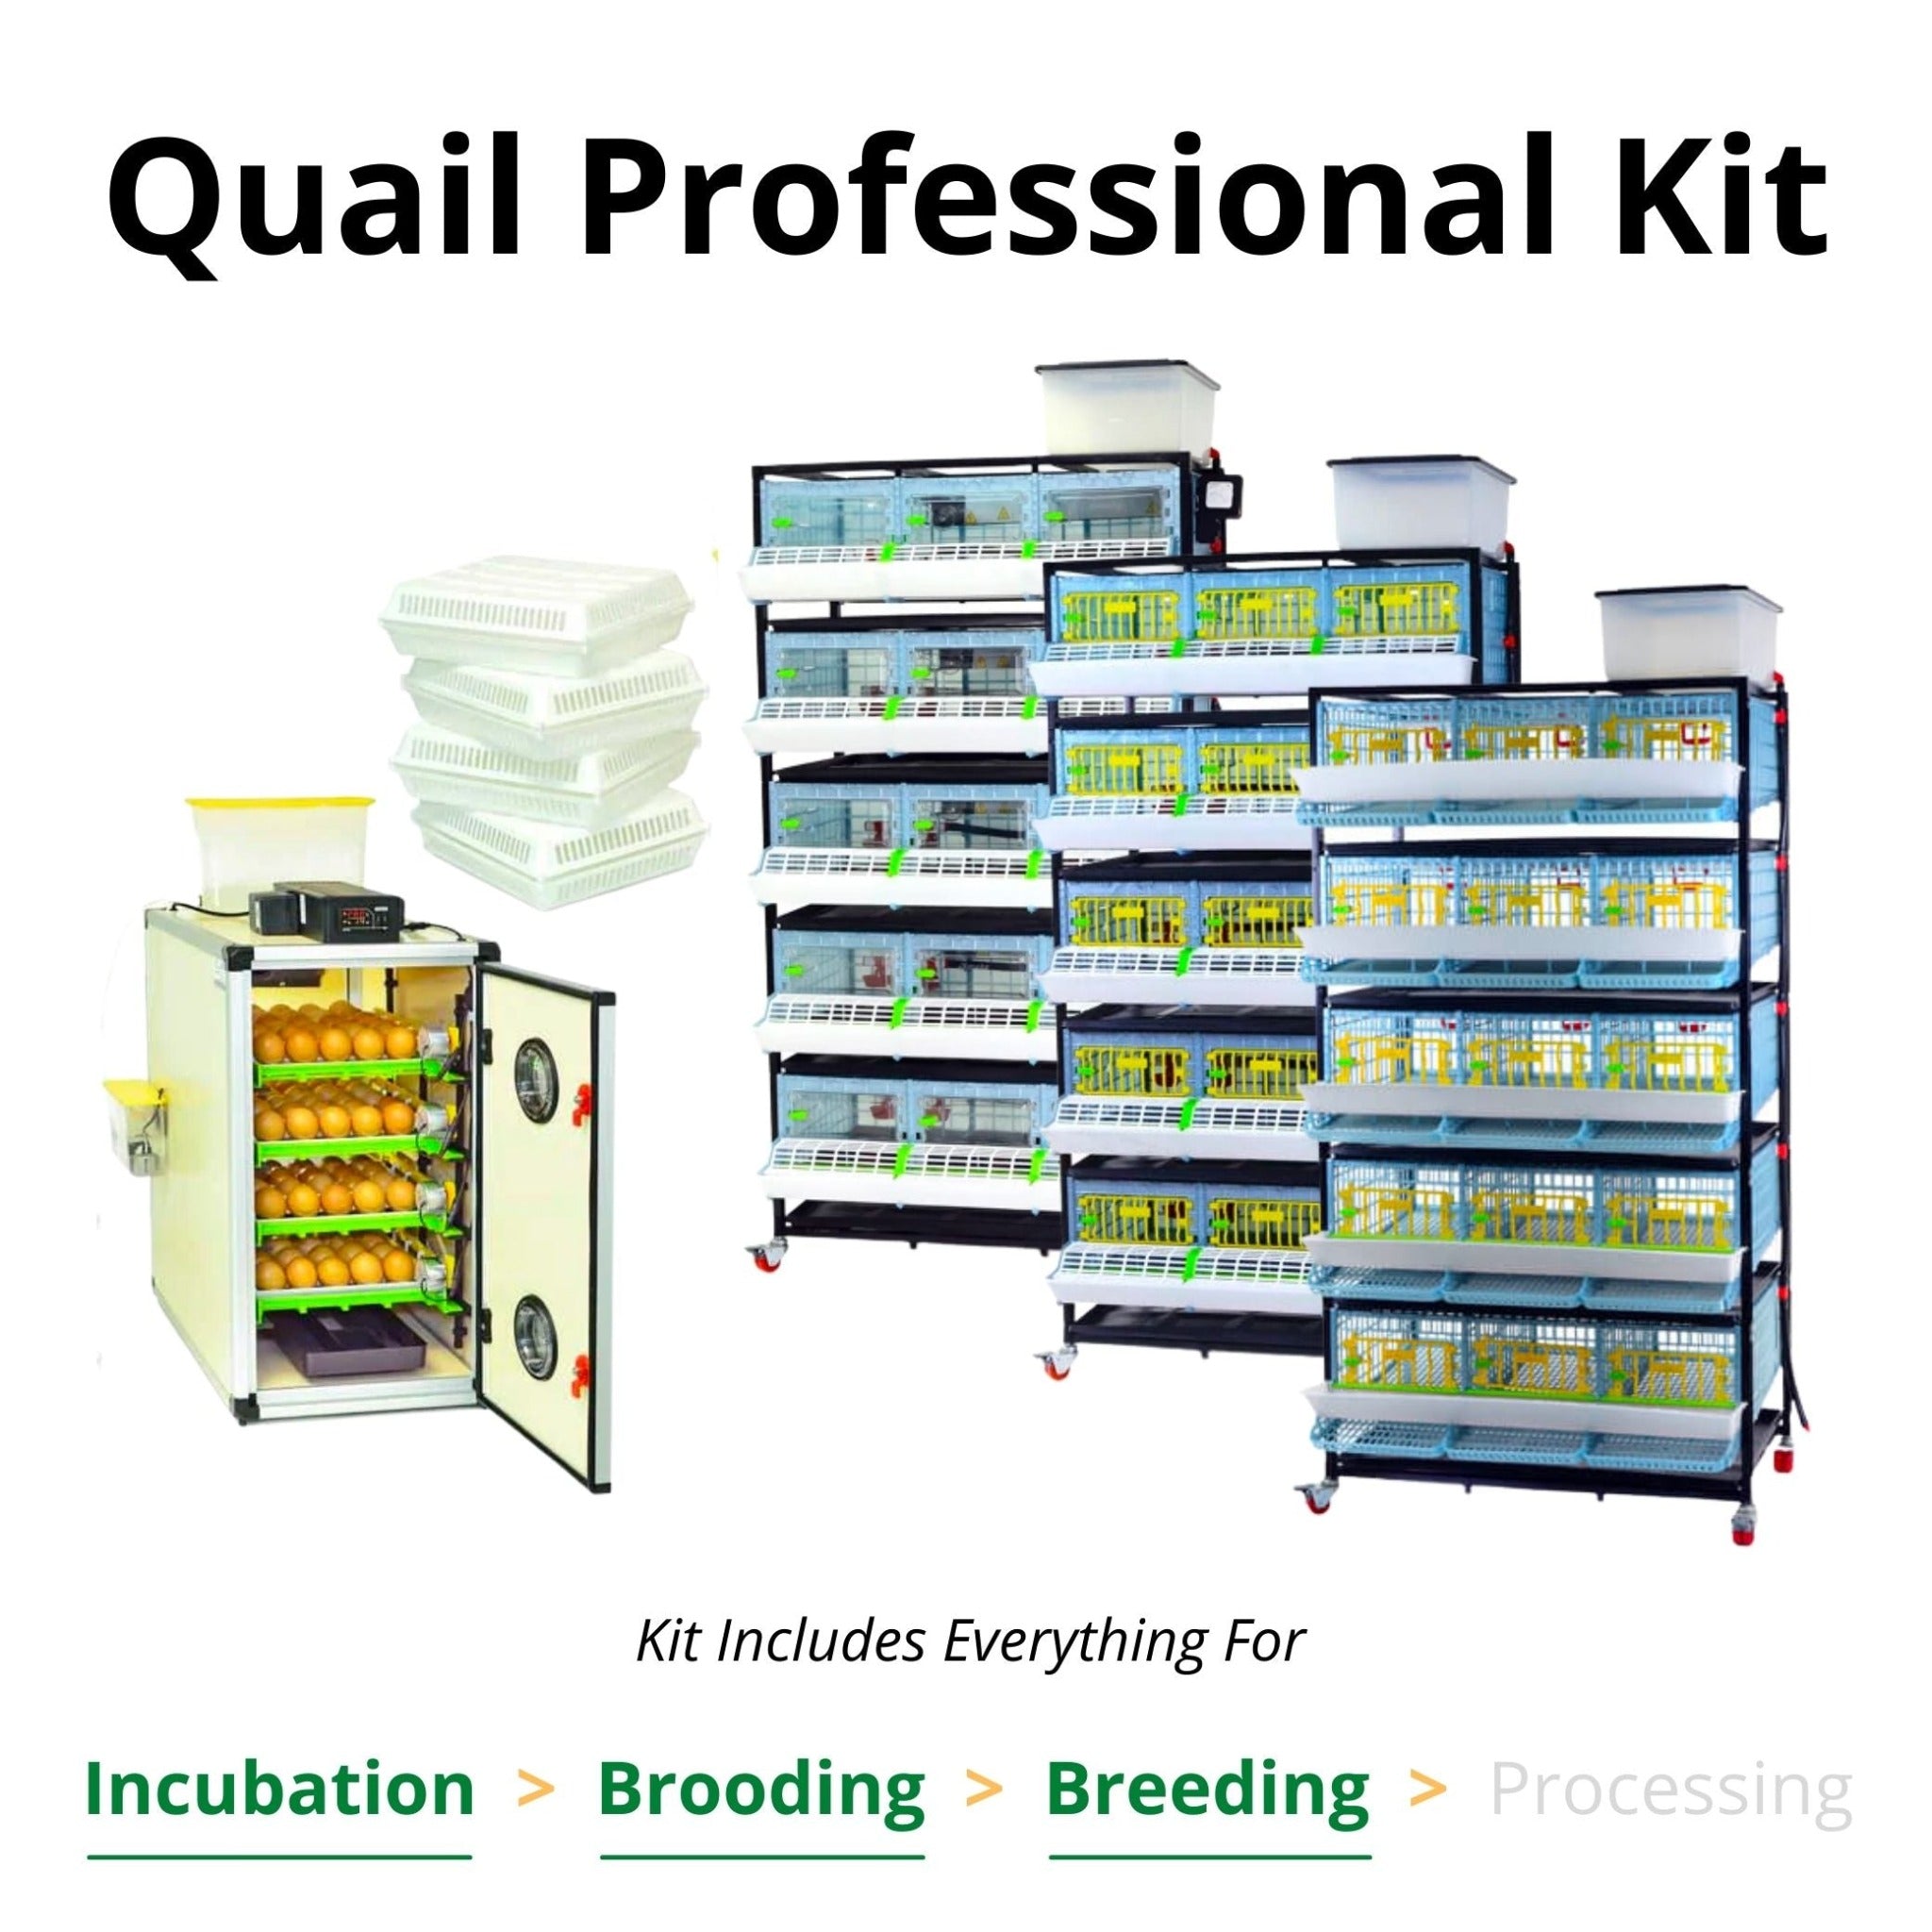 Hatching Time Cimuka. Quail professional kit shown. CT120 incubator, 5 layer cb25 9" brooder, grow out pen and quail cage shown in image